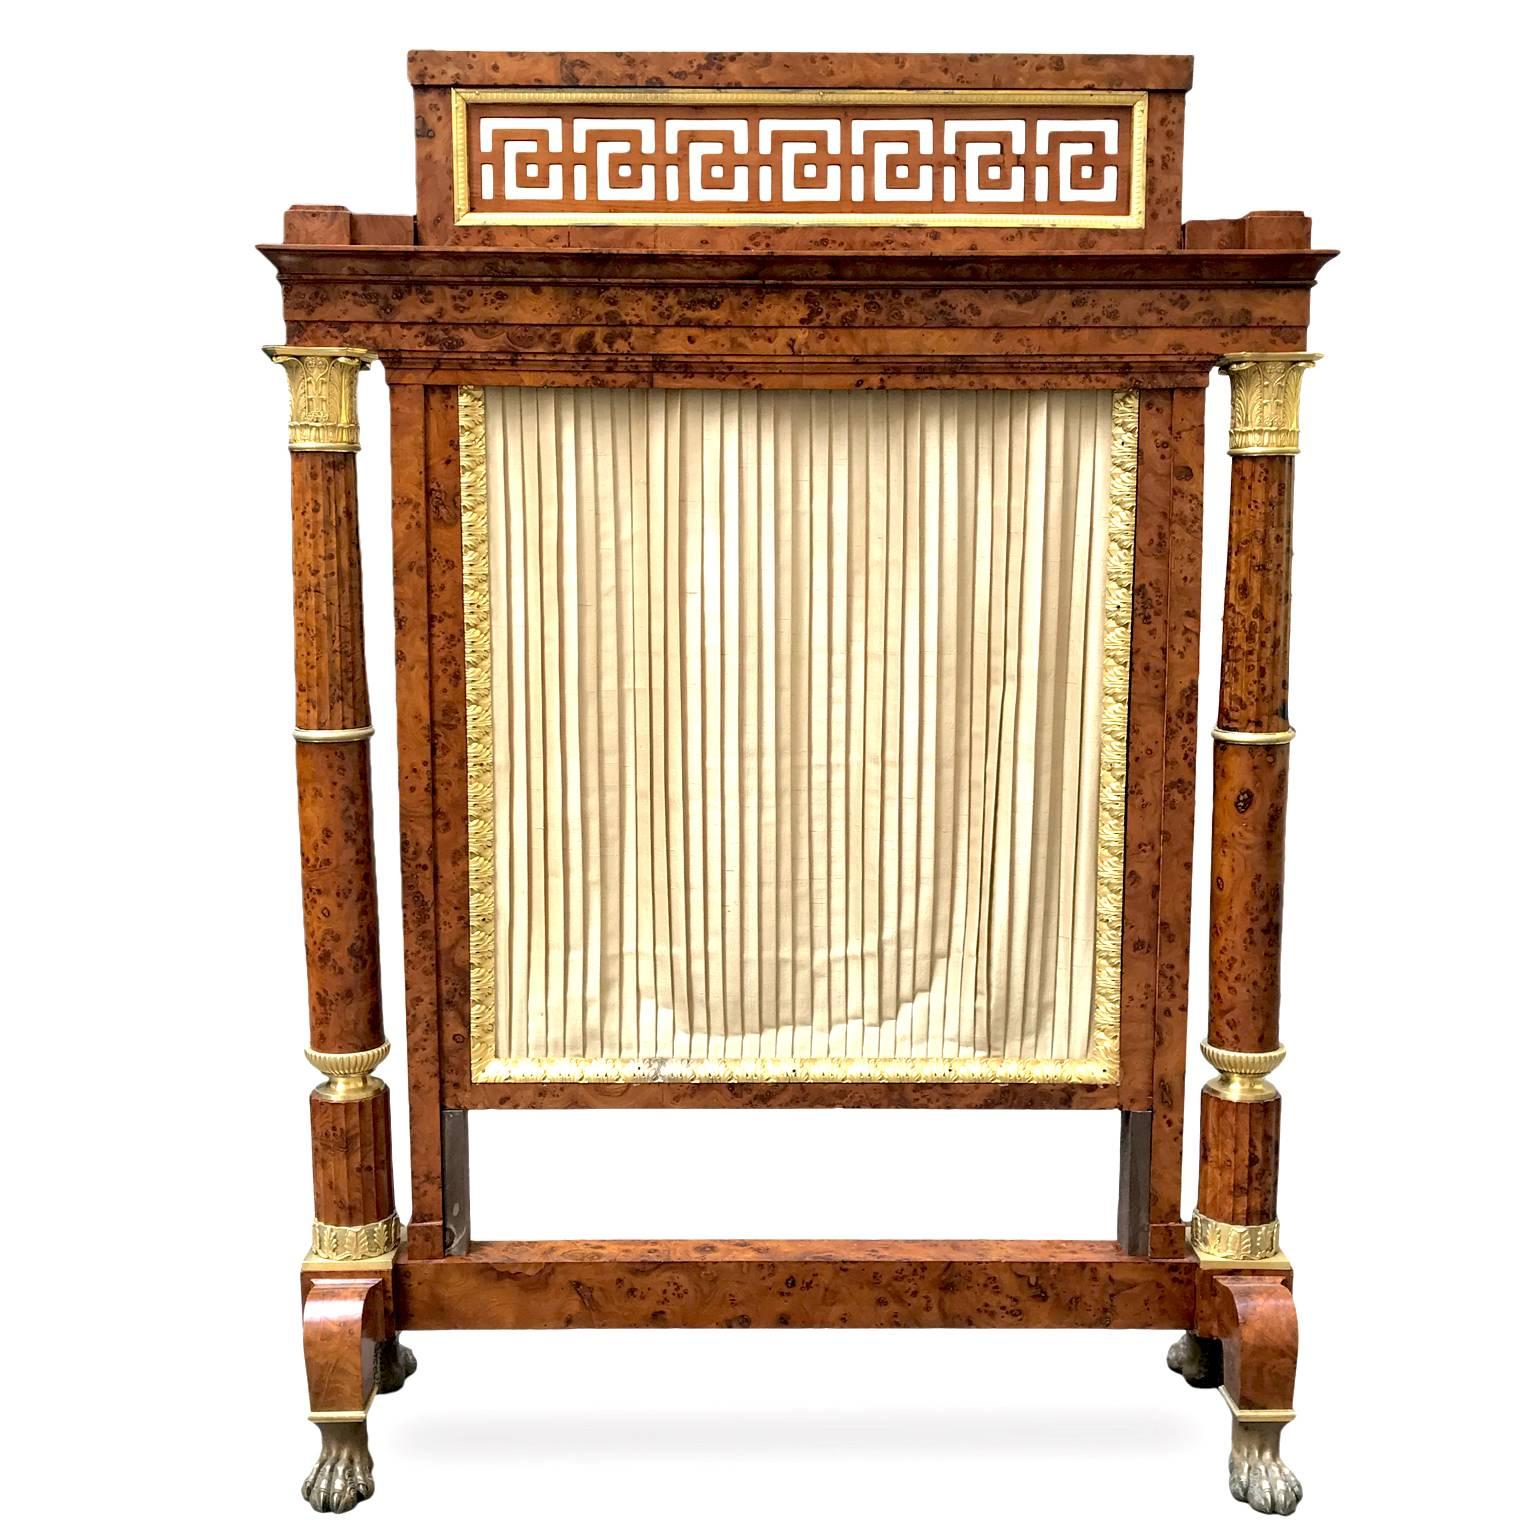 An elegant French Empire solid and veneered burl thuya wood fireplace screen, a high-quality écran à coulisse with gilt bronze mounts circa 1810 and coming from a luxury Italian villa at Como lake. Excellent condition.

The screen panel, in pleated